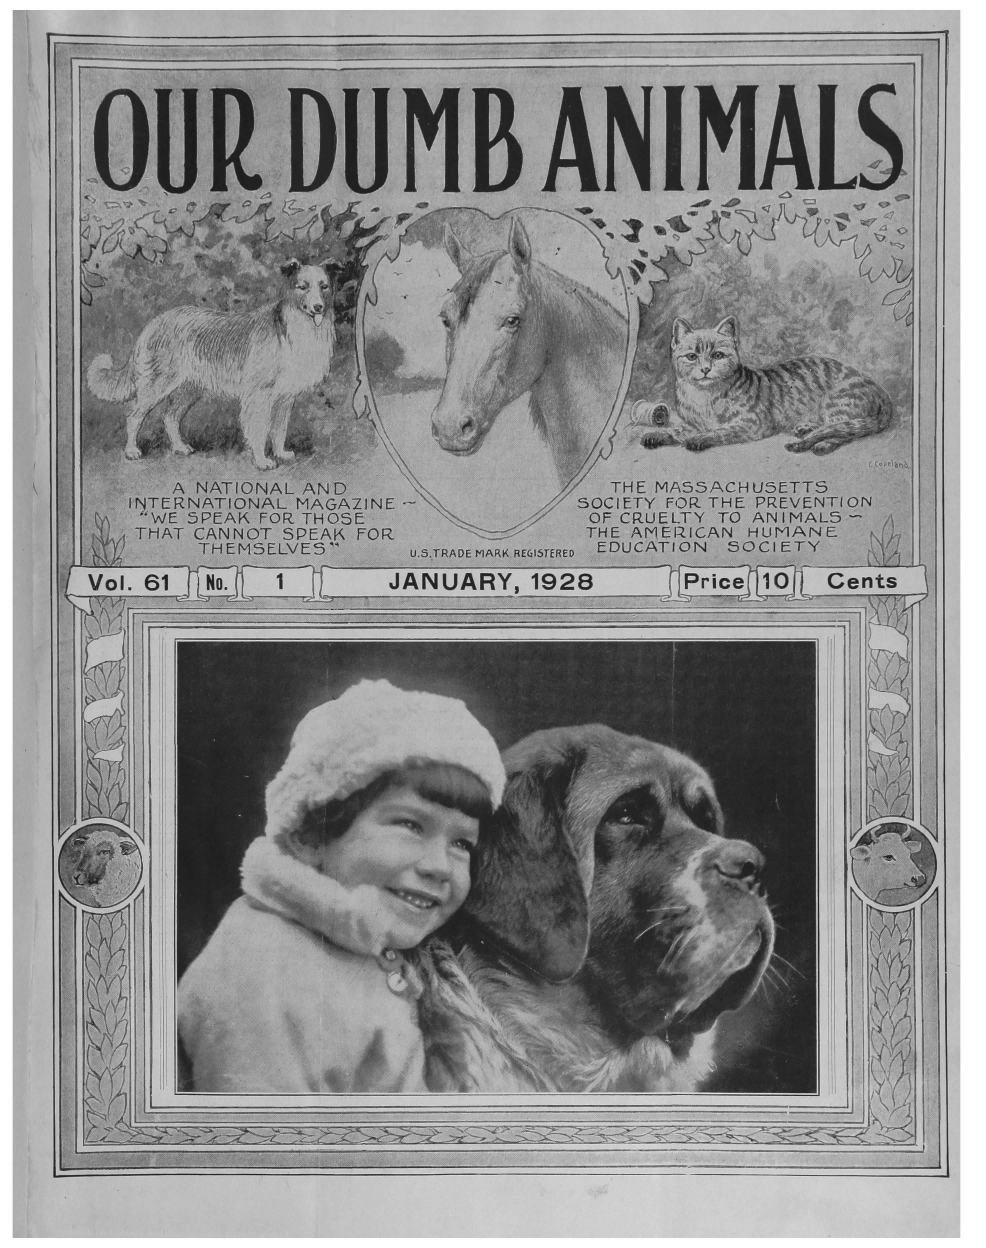 handle is hein.journals/animals61 and id is 1 raw text is: 








OUR DUMB ANIMALS







                          010k







     A NATIONAL AND            THE MASSACHUSETTS
  INTERNATIONAL MAGAZINE     SOCIETY FOR THE PREVENTION
  -WE 5PEAK FOR THOSE         OF CRUELTY TO ANIMALS
  THAT CANNOT SPEAK FOR       THE AMEIRICAN HUMANE
       THEMSELVES       US.TRADE MARK.RE615TERED EDUCATION SOCIETY

Vol. 61           JANUARY, 1928             Cents


                                         1>


















          A1                     i


I


